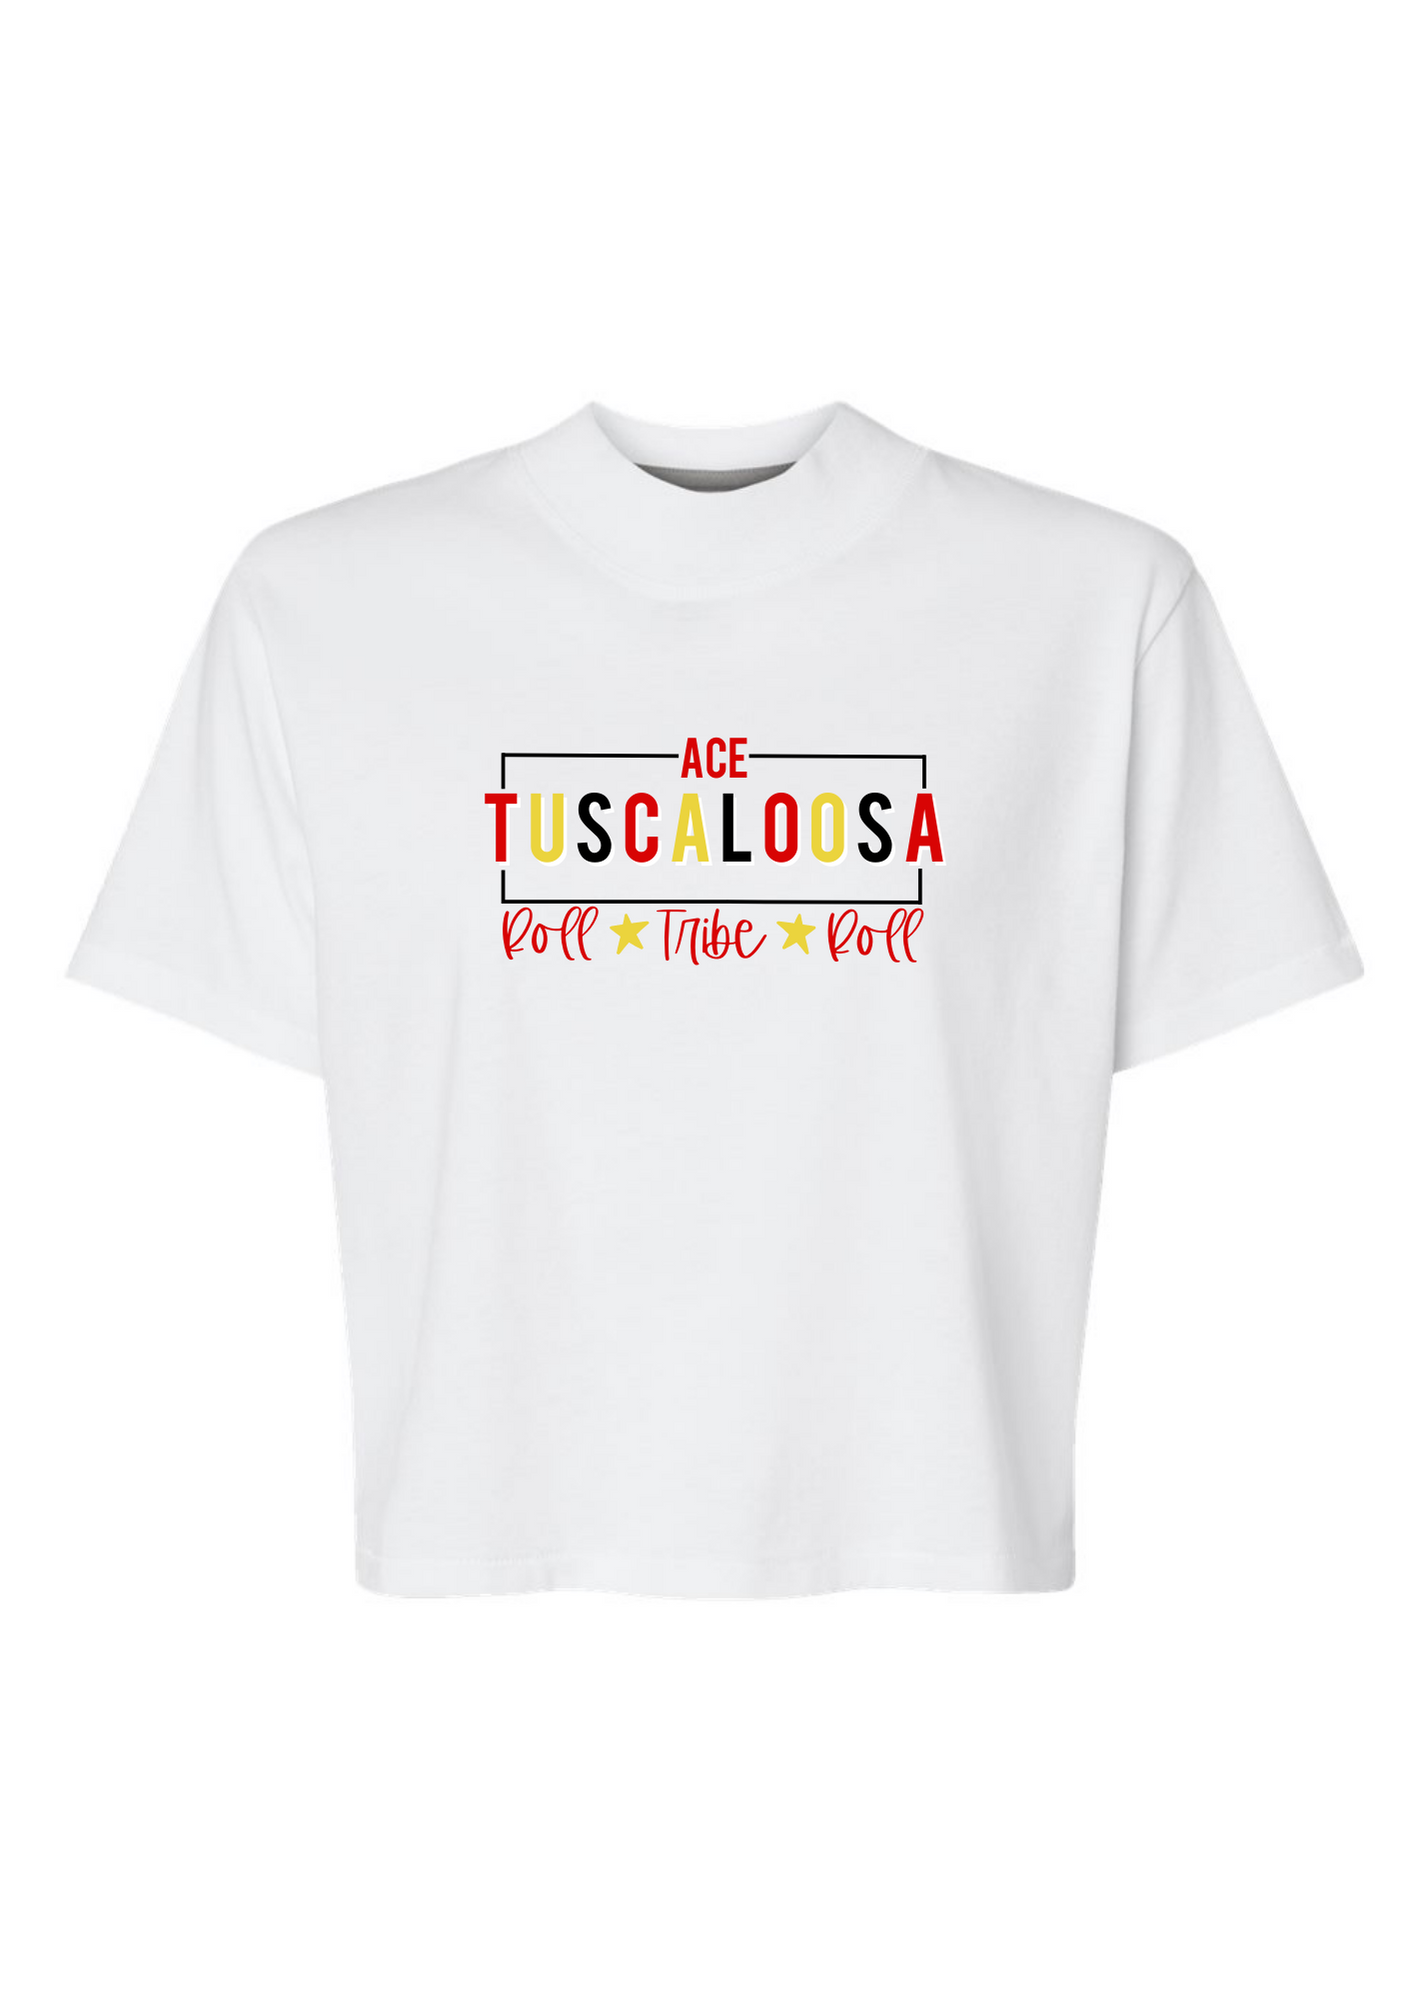 ACE Tuscaloosa | Mom Crop Tee-Adult Tee-Sister Shirts-Sister Shirts, Cute & Custom Tees for Mama & Littles in Trussville, Alabama.